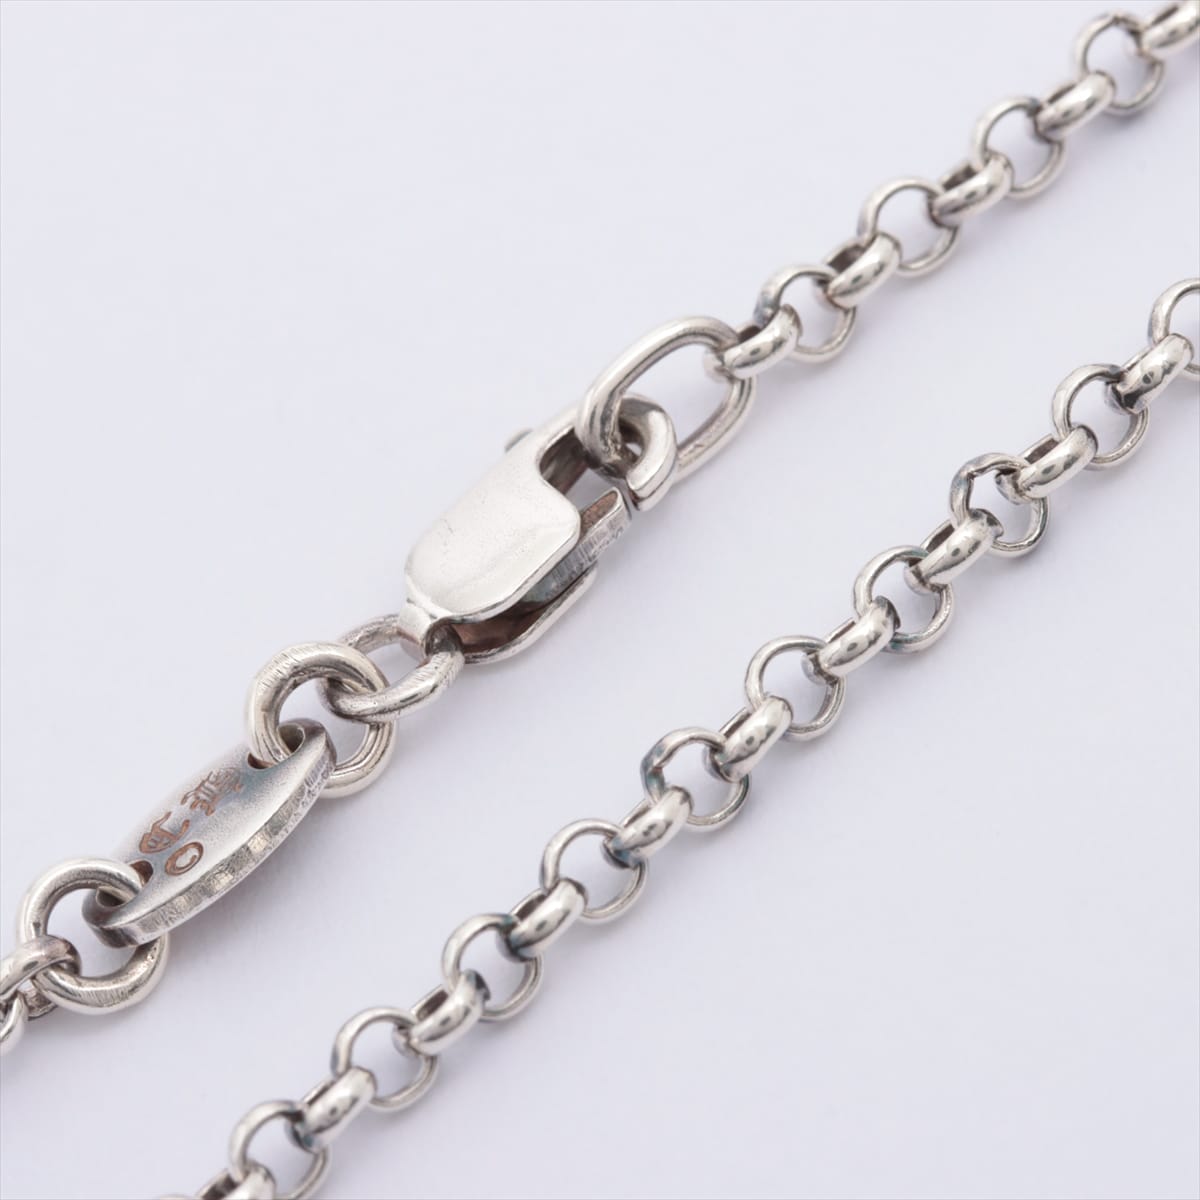 Chrome Hearts Roll Chain 18 Inches Necklace 925 5.2g